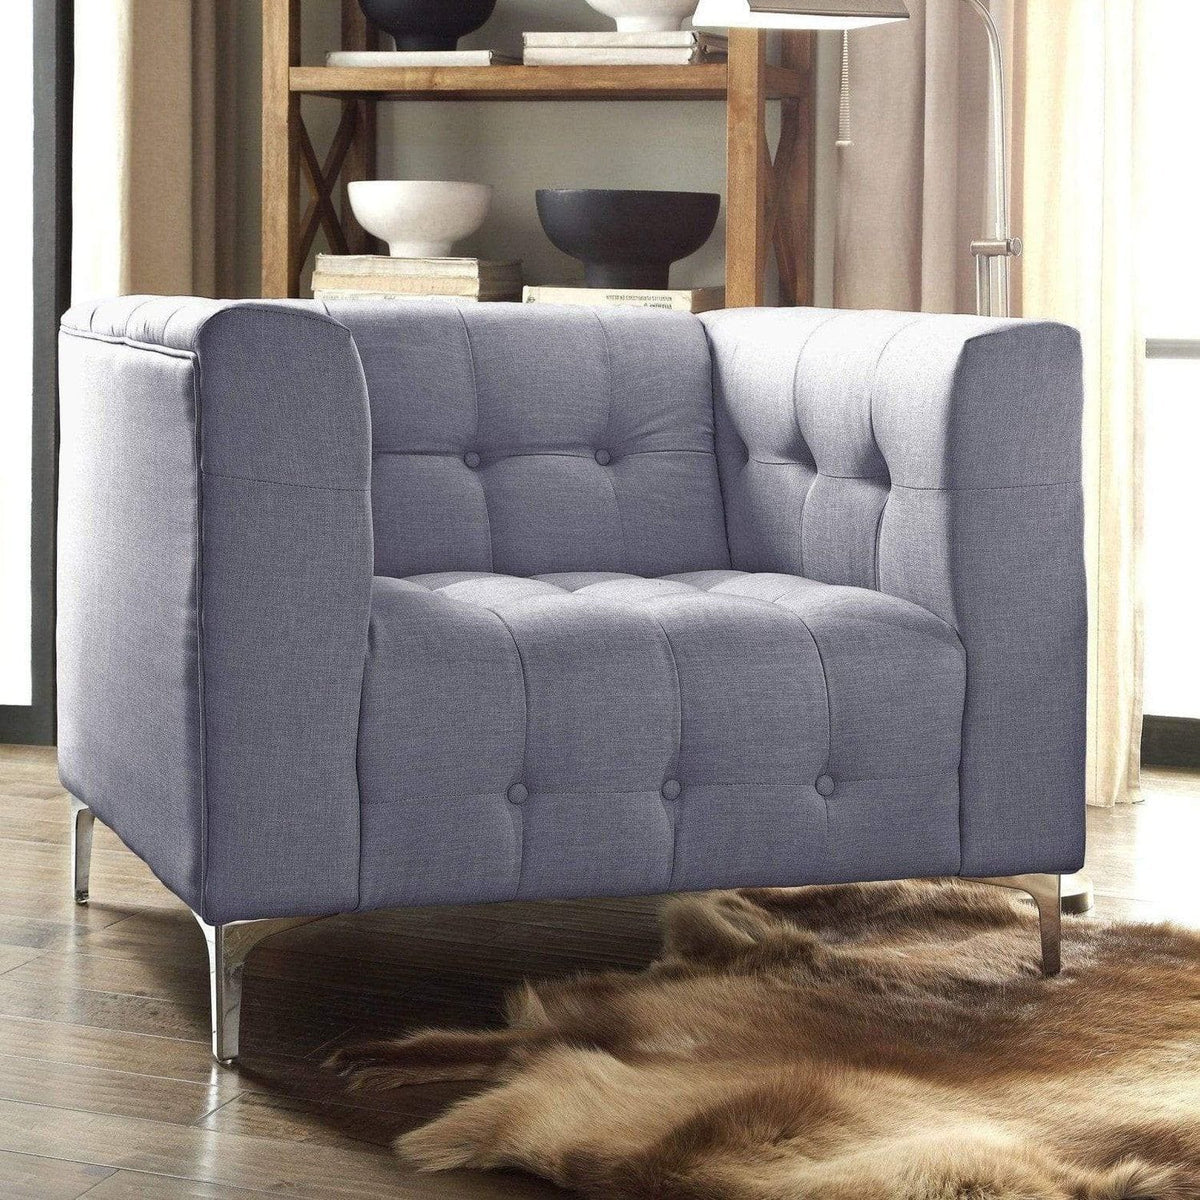 Iconic Home Capone Tufted Linen Club Chair With Silver Legs Smoke